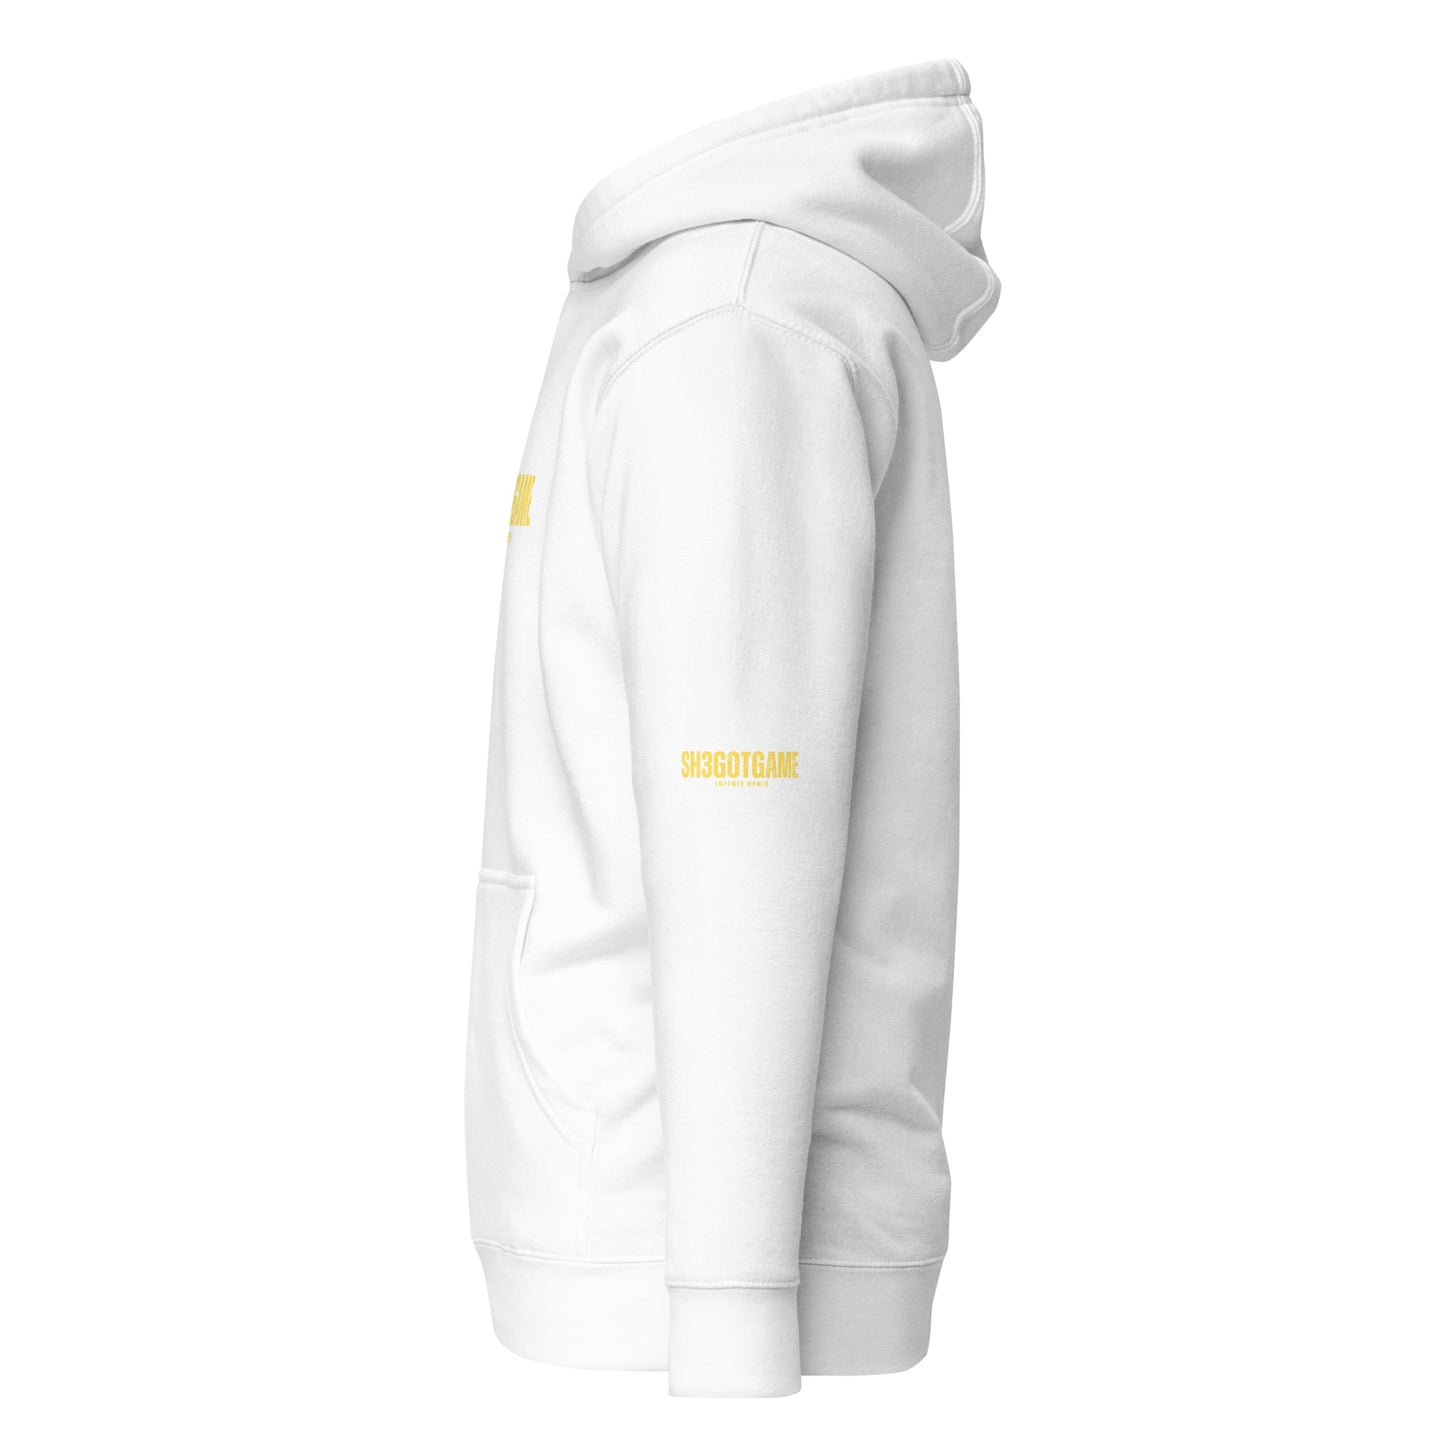 Sh3gotgame Yellow Label Hoodie